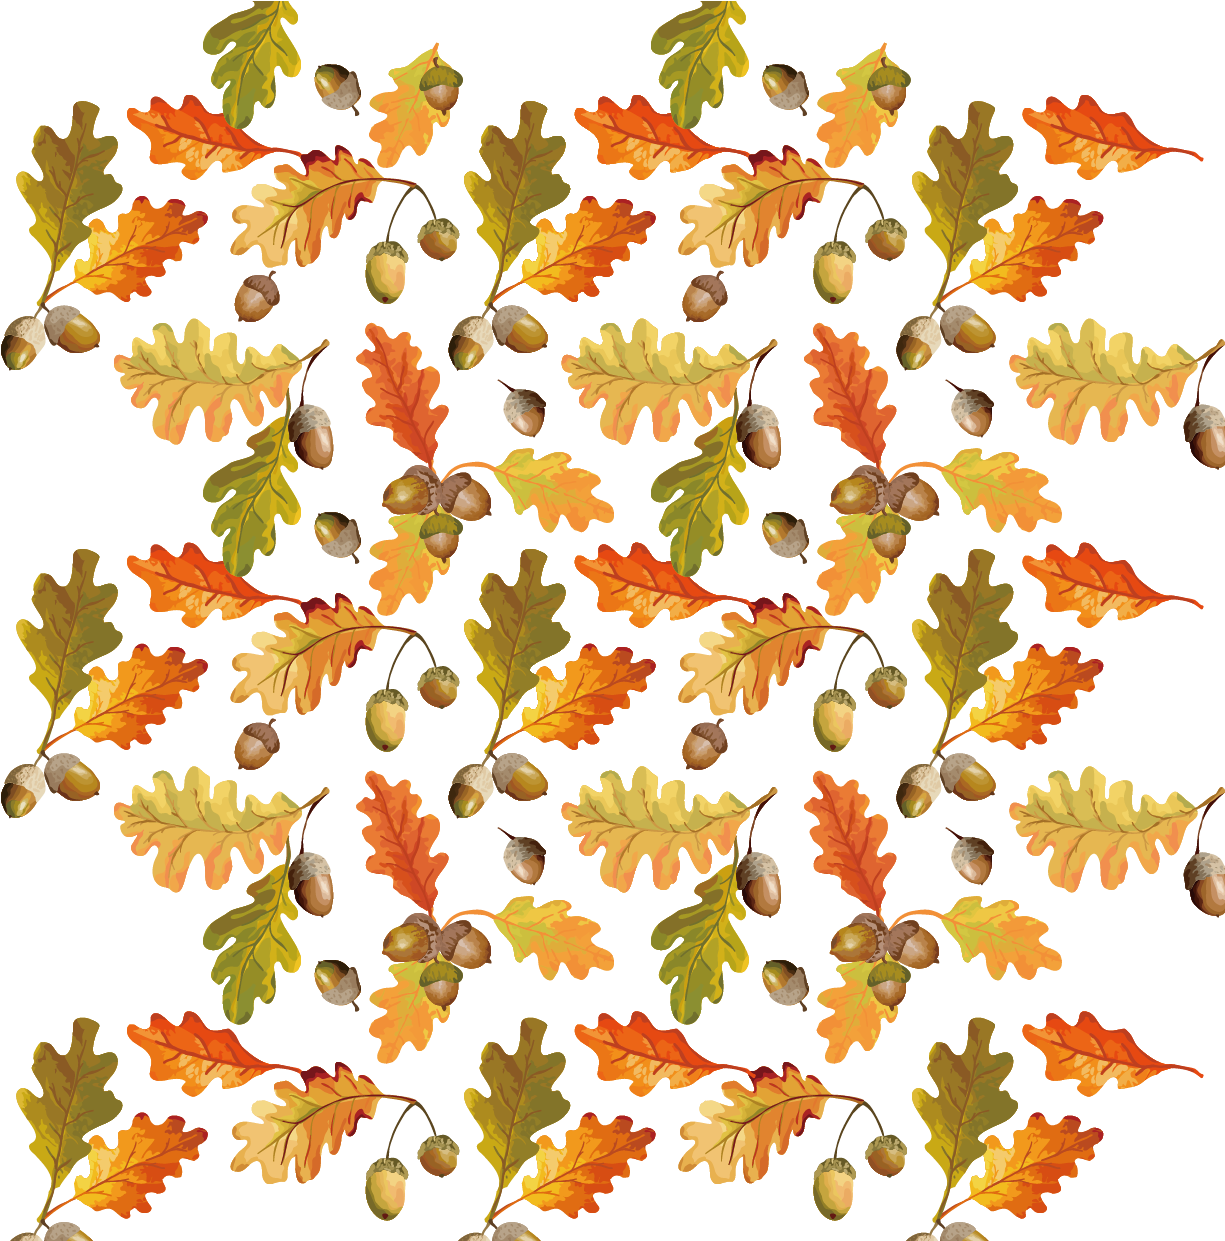 Autumn Leaves Background Vector Material - Vector Graphics (1240x1240)